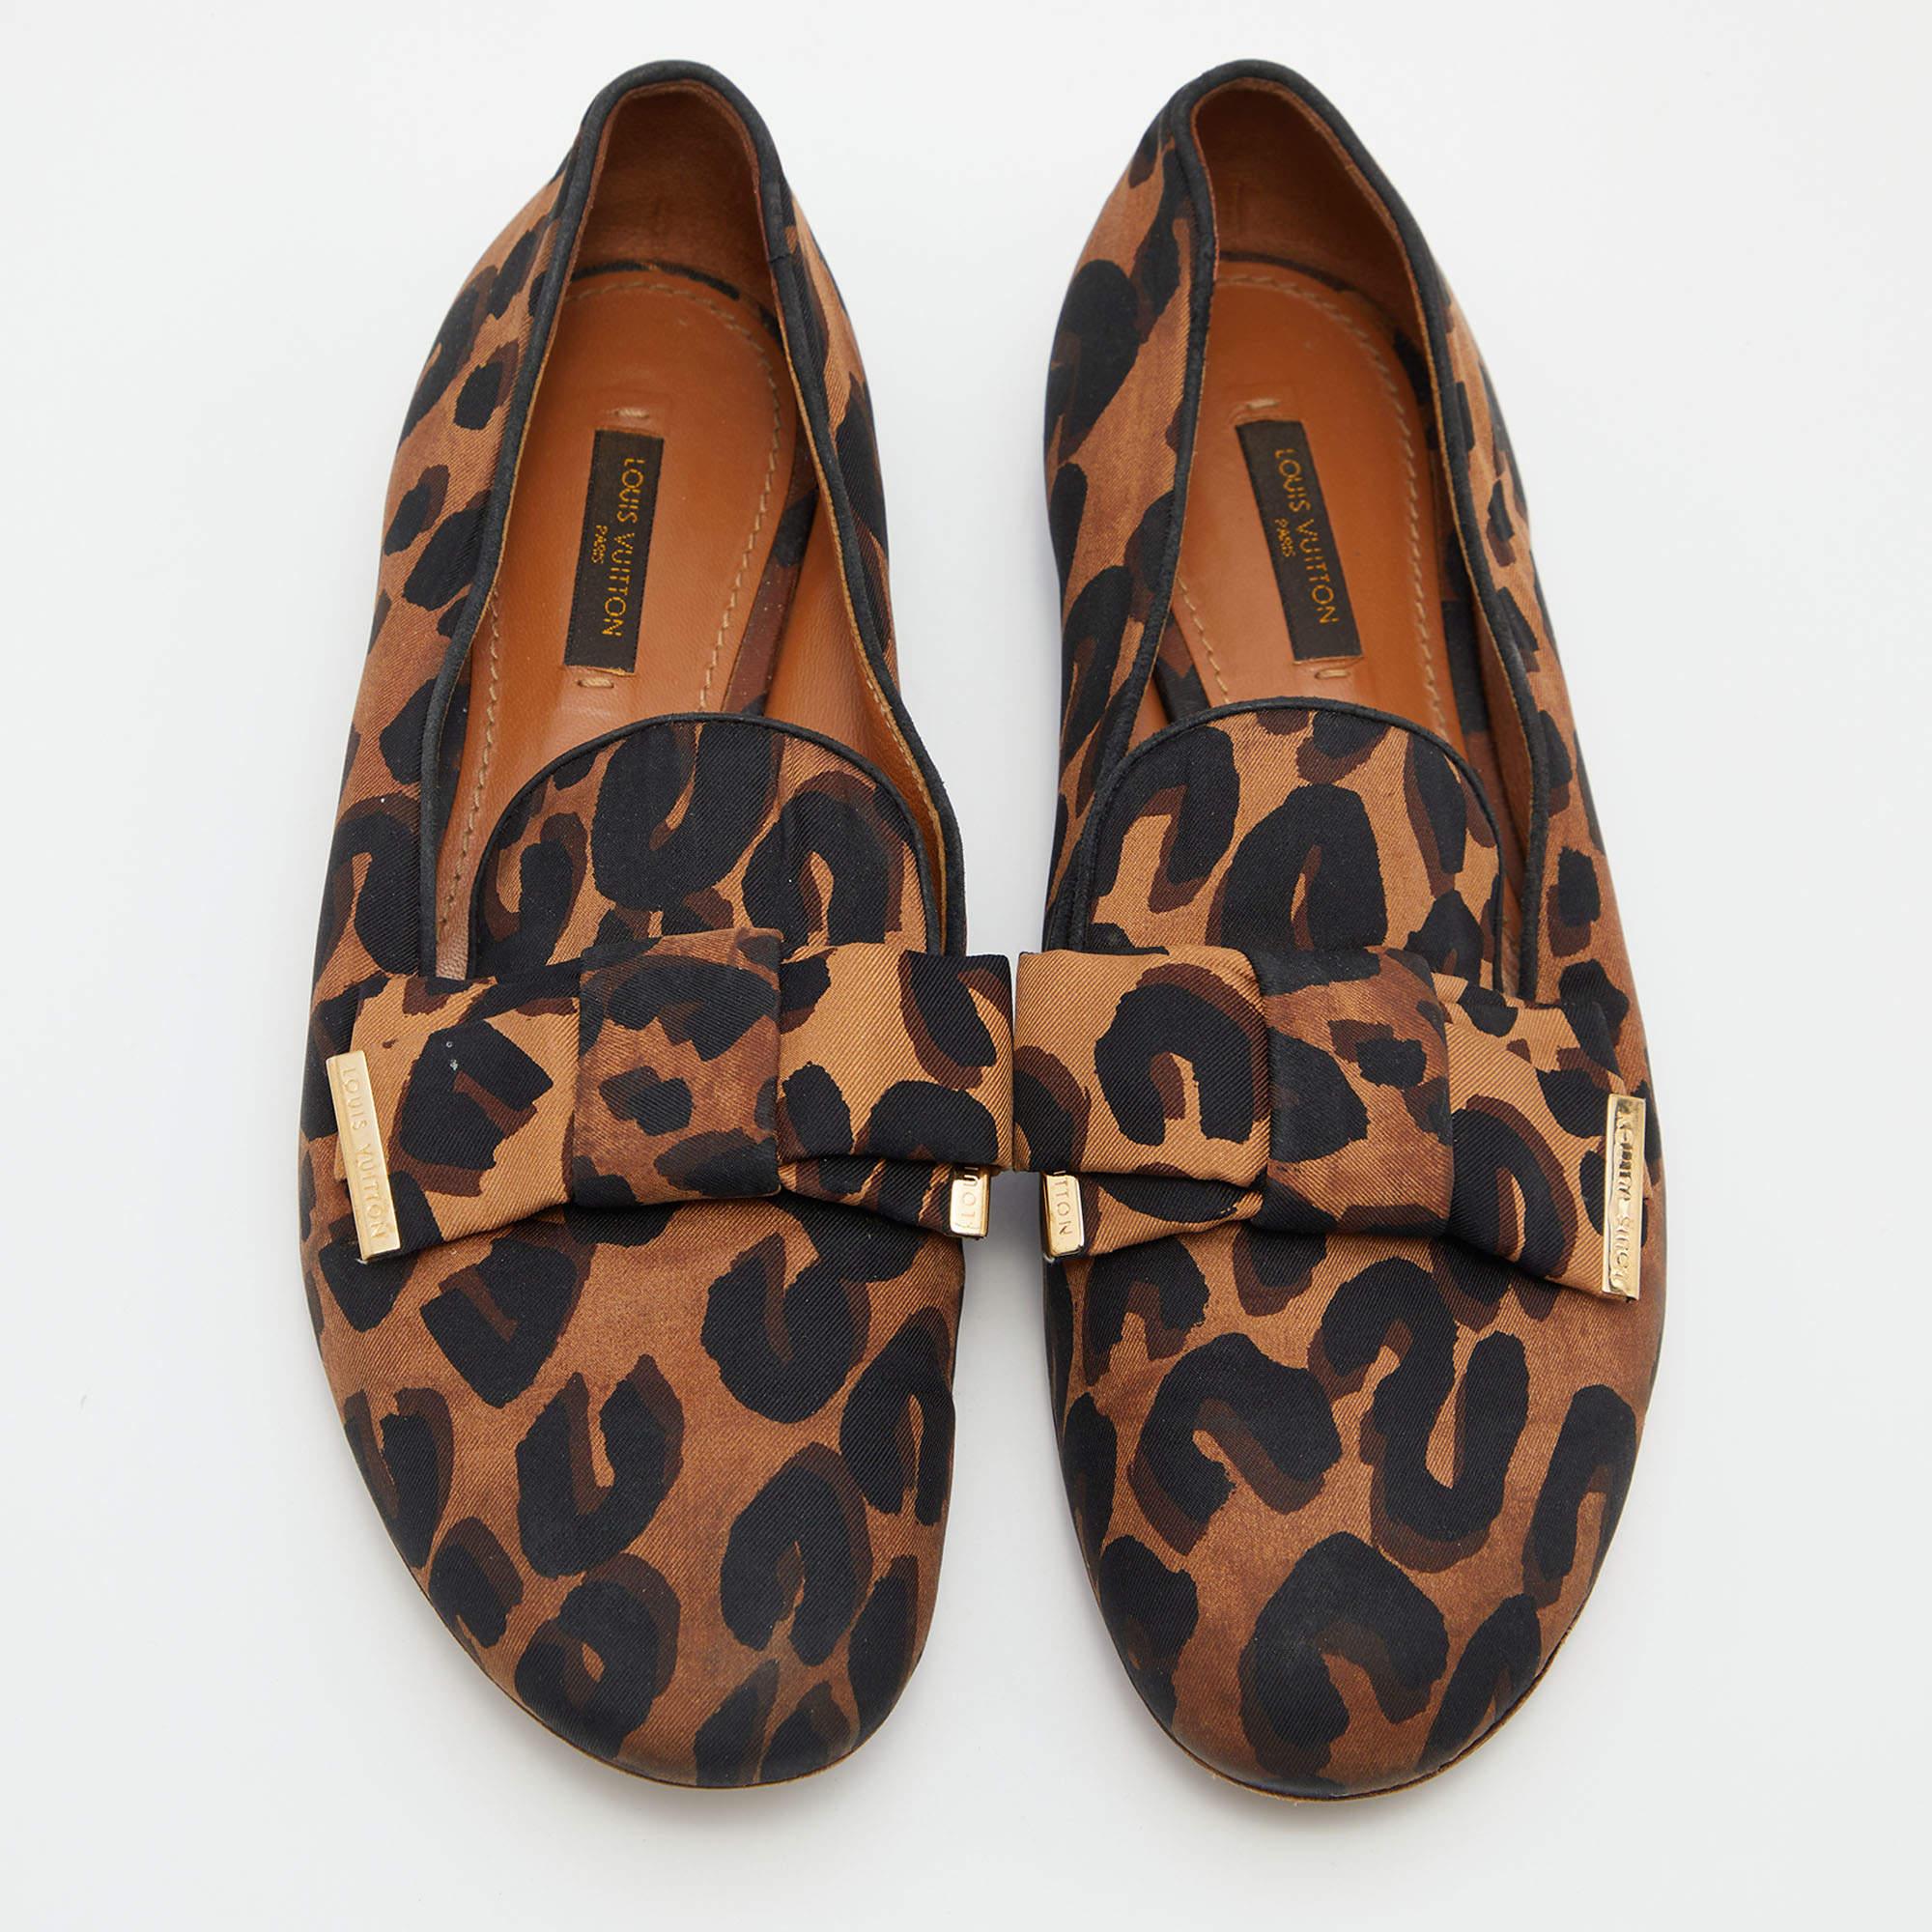 Women's Louis Vuitton Brown Leopard Printed Fabric Bow Detail Smoking Slippers Size 39